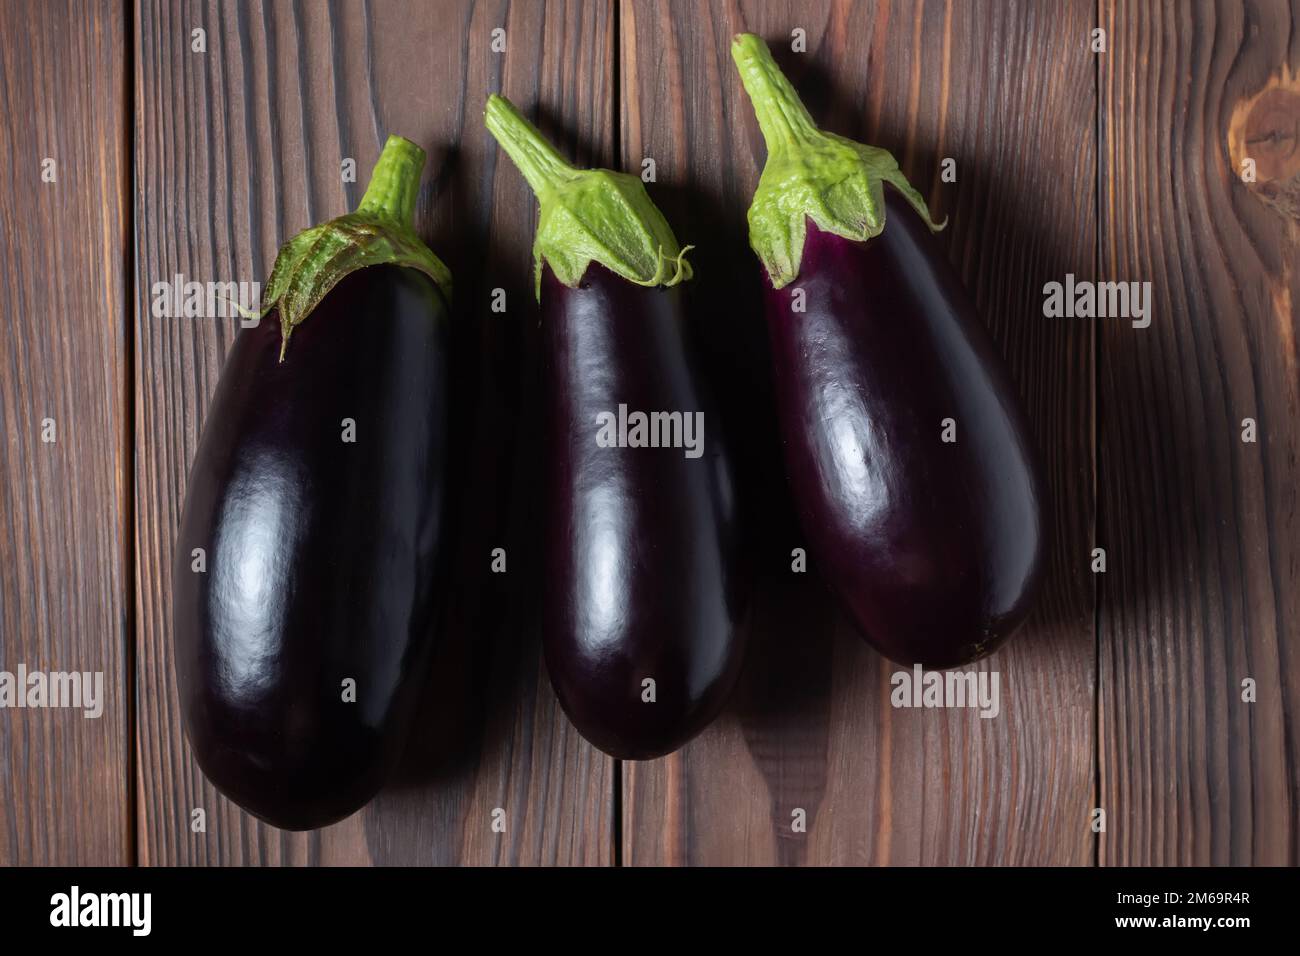 Frsh organic eggplant on the wooden boards. Stock Photo